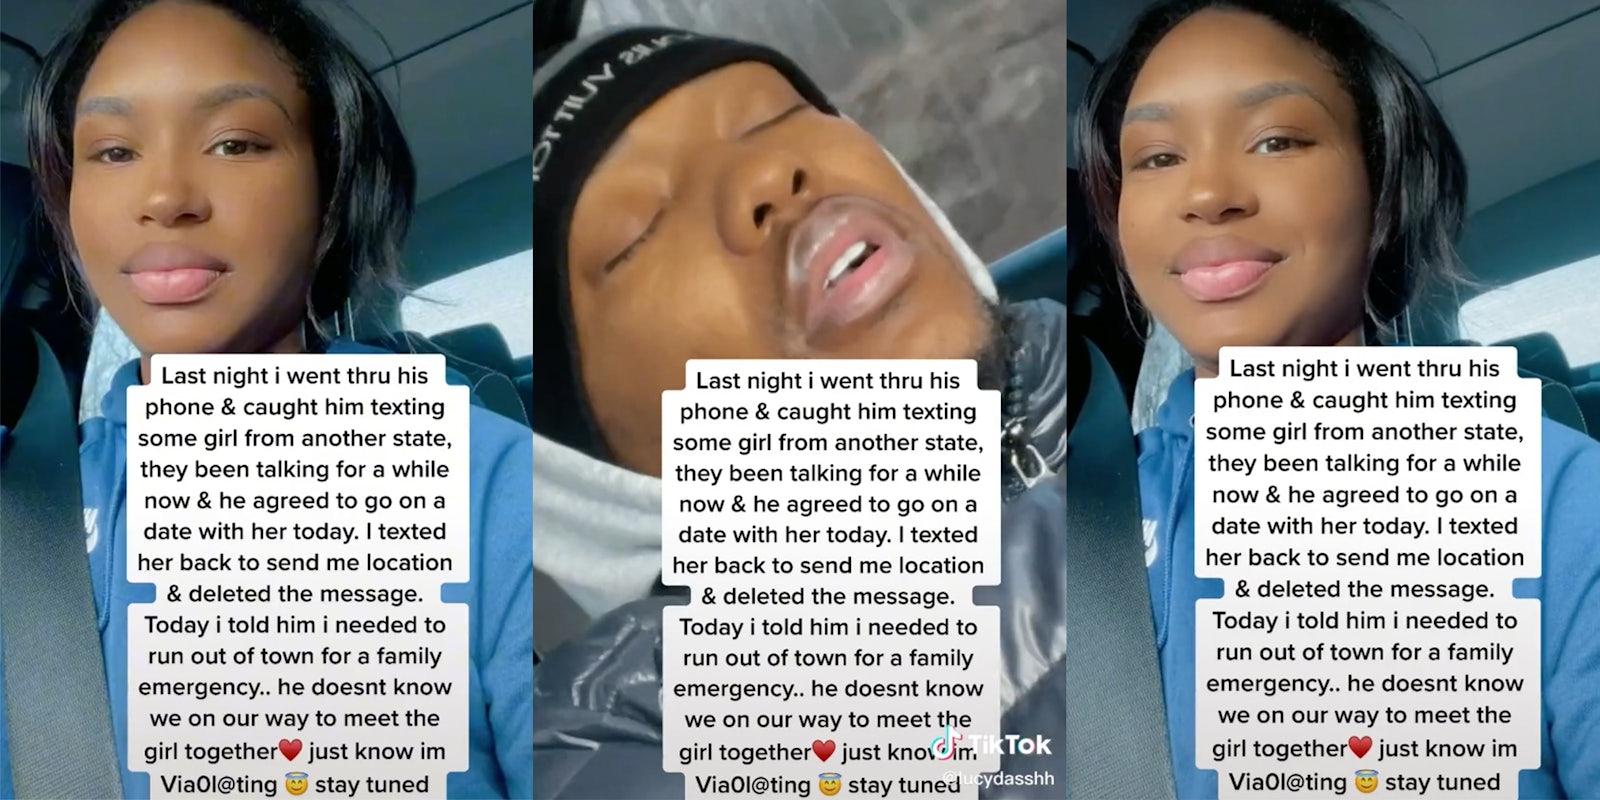 TikToker says she tricked her boyfriend into roadtrip to meet woman he was cheating with.